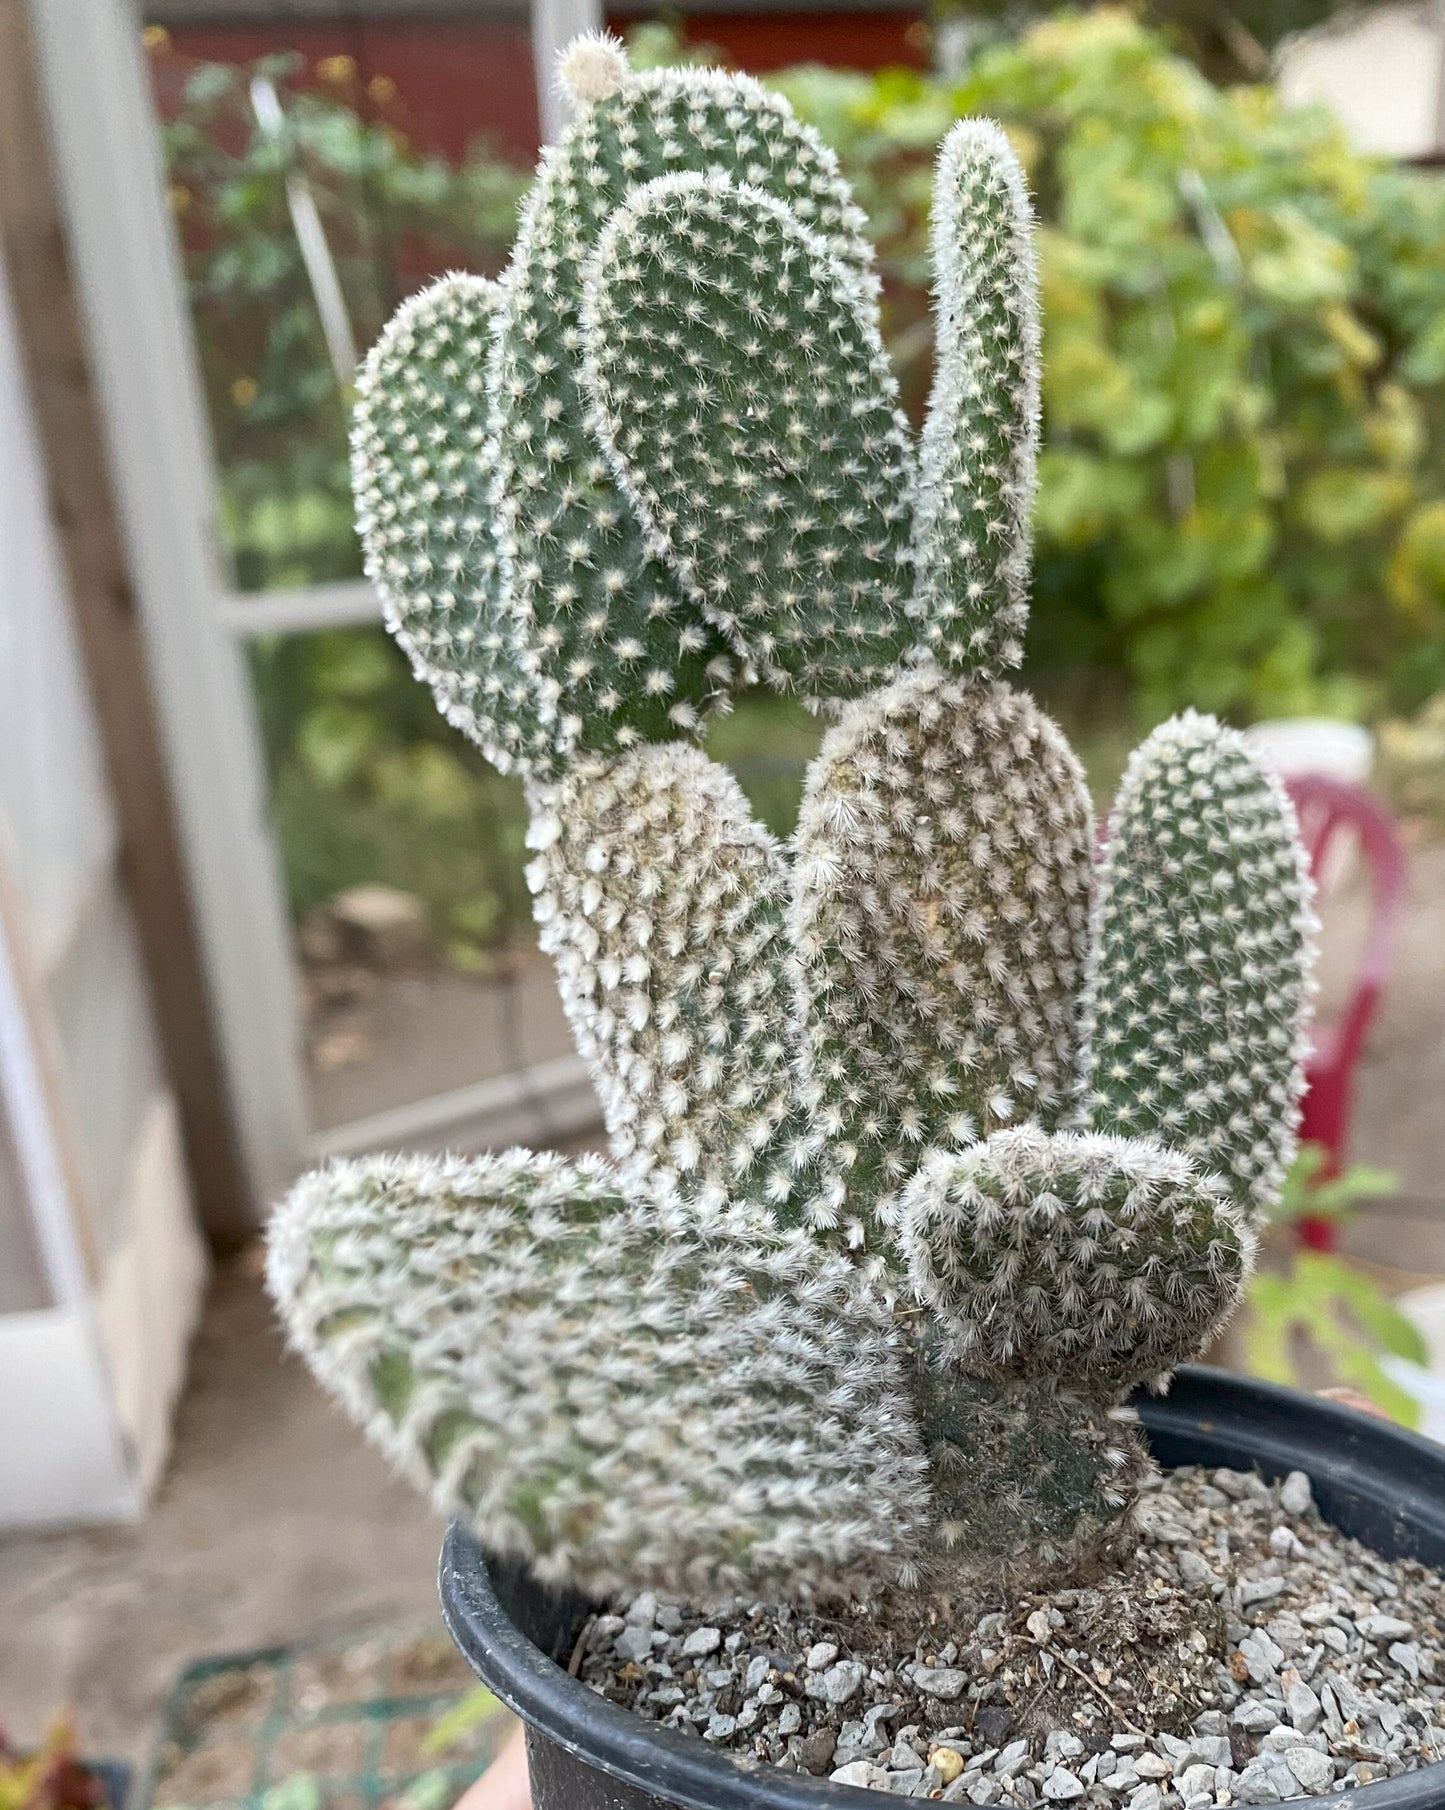 White Bunny Ears Cactus, Opuntia Microdasys Albaspina, Well Rooted, 3-5in